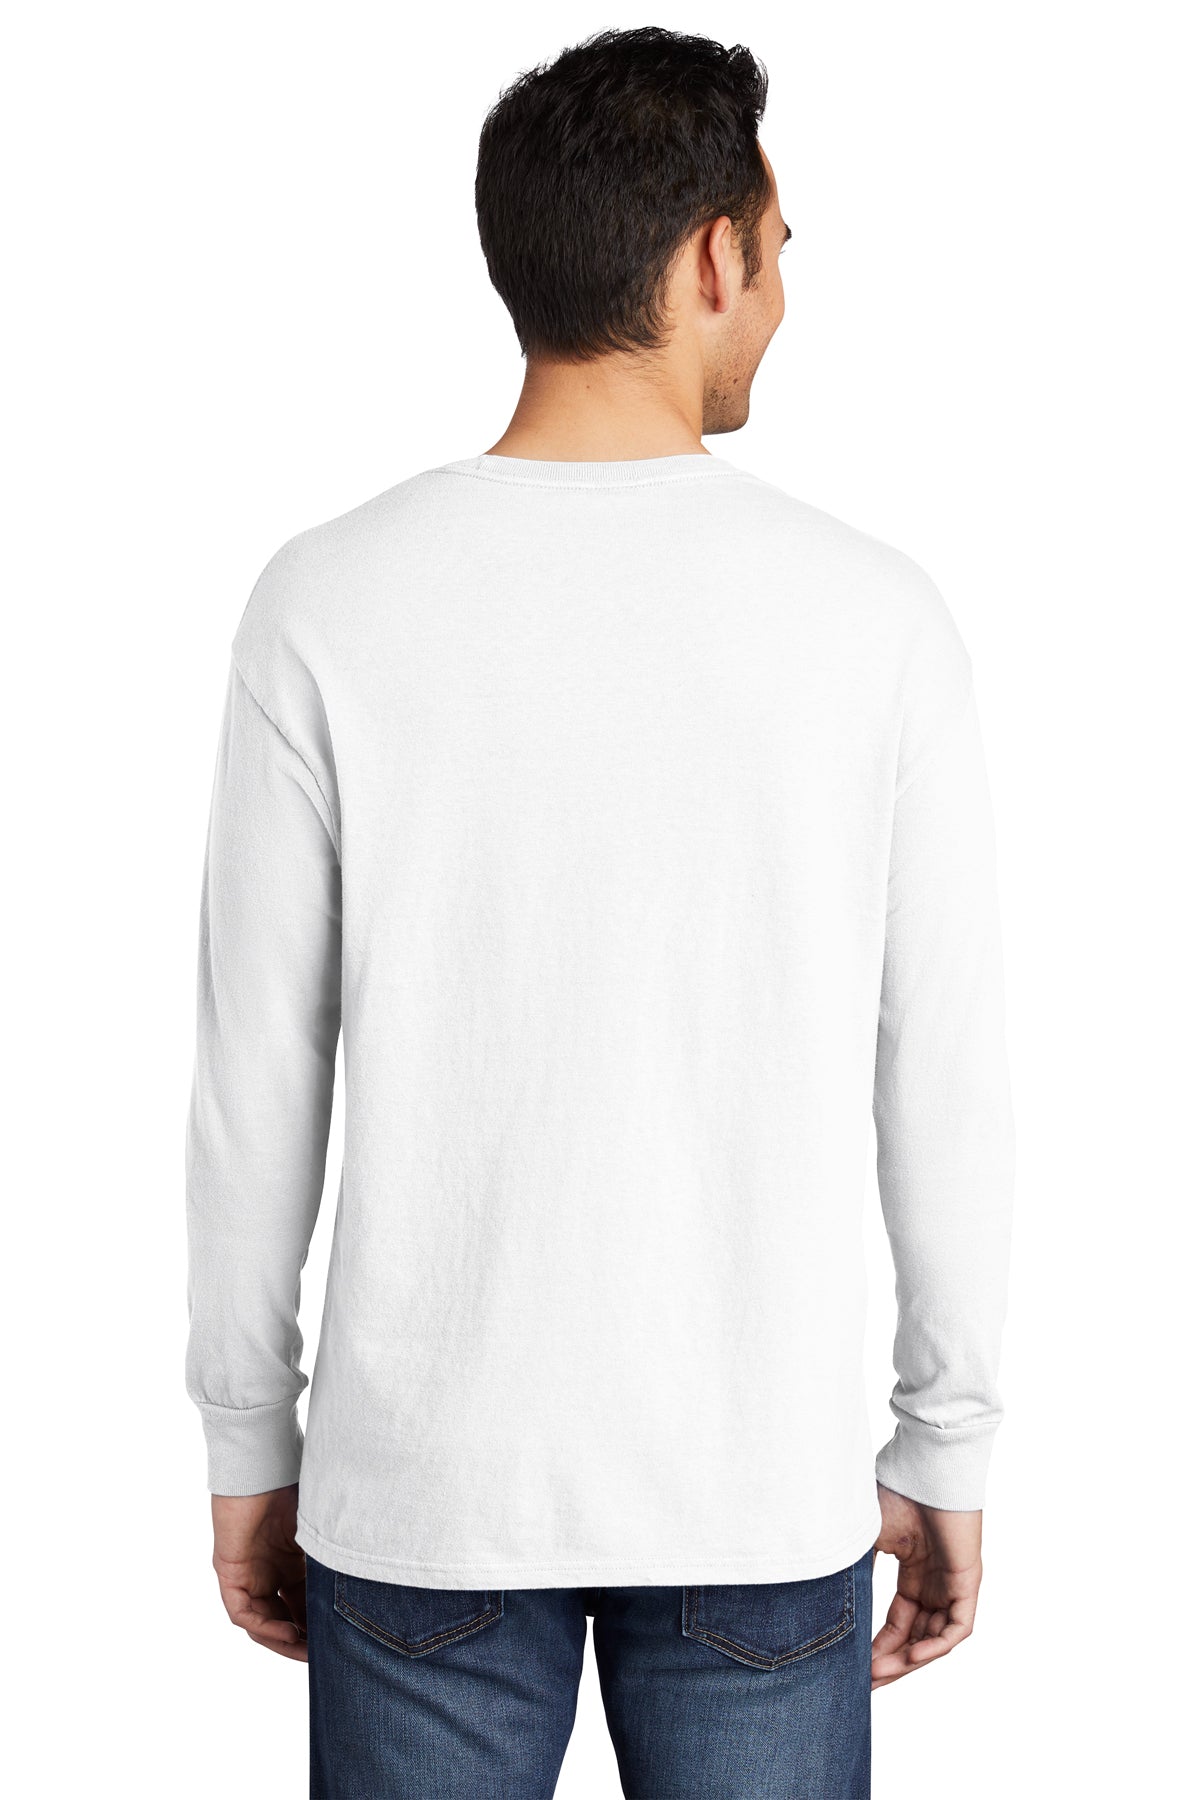 Port & Company Pigment-Dyed Long Sleeve Tee